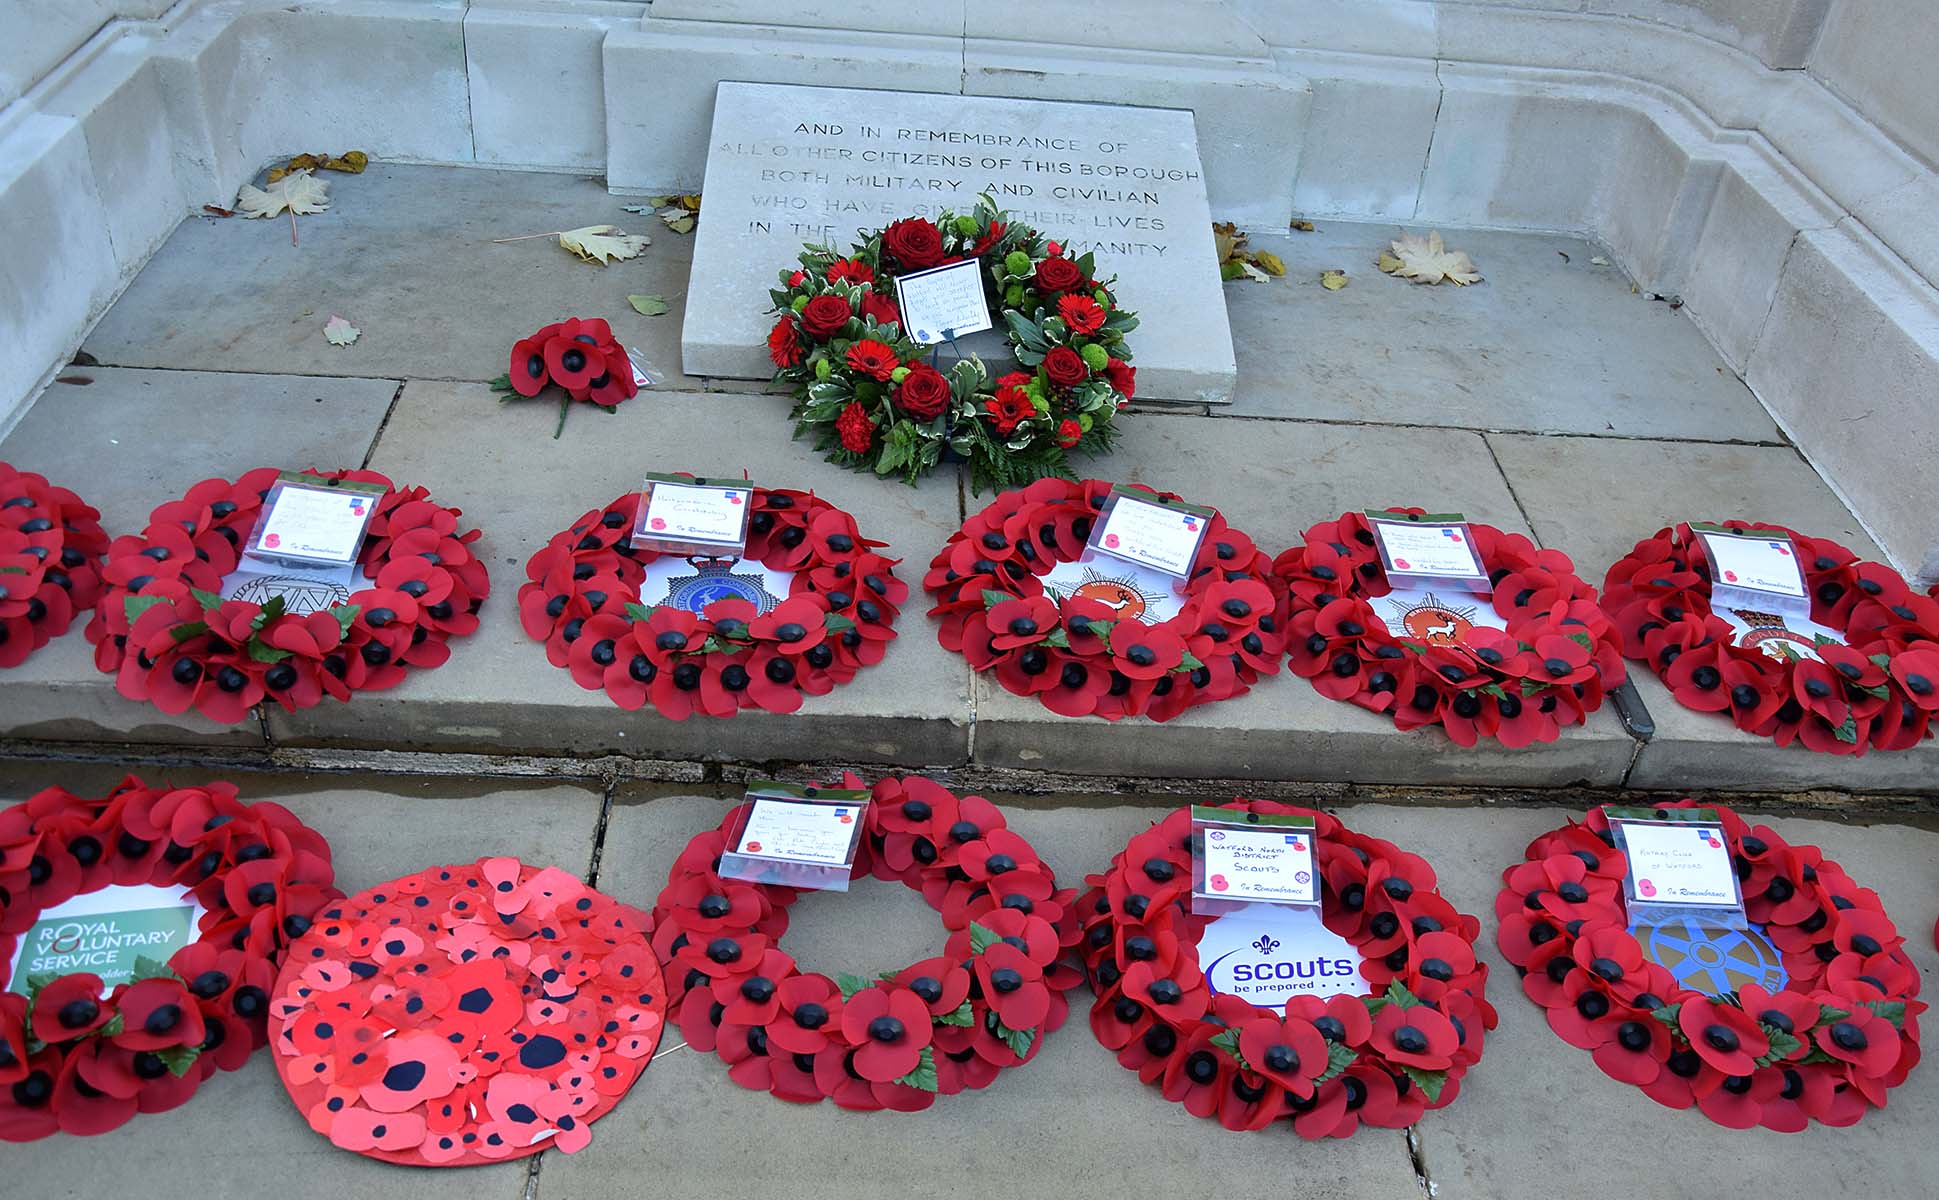 Ex-servicemen’s and women’s organisations, led by the Royal British Legion, layed wreaths, as will the police, fire and rescue service, ambulance service, scouts, army cadets and many others.